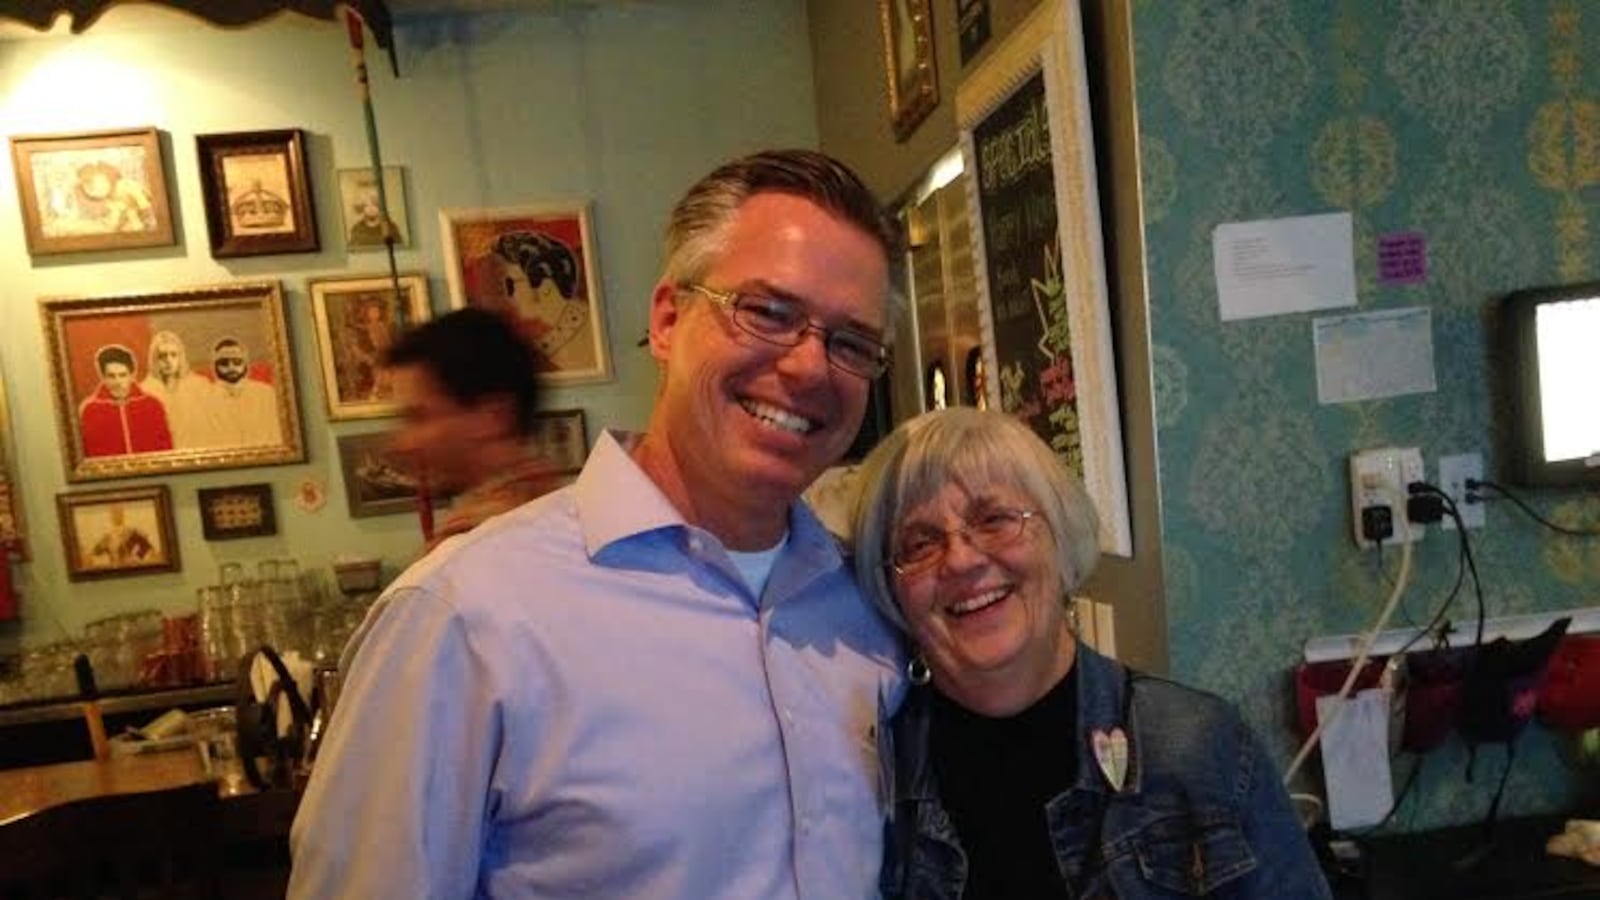 Robert Speth with a supporter at his election watch party at a northwest Denver restaurant (Melanie Asmar).